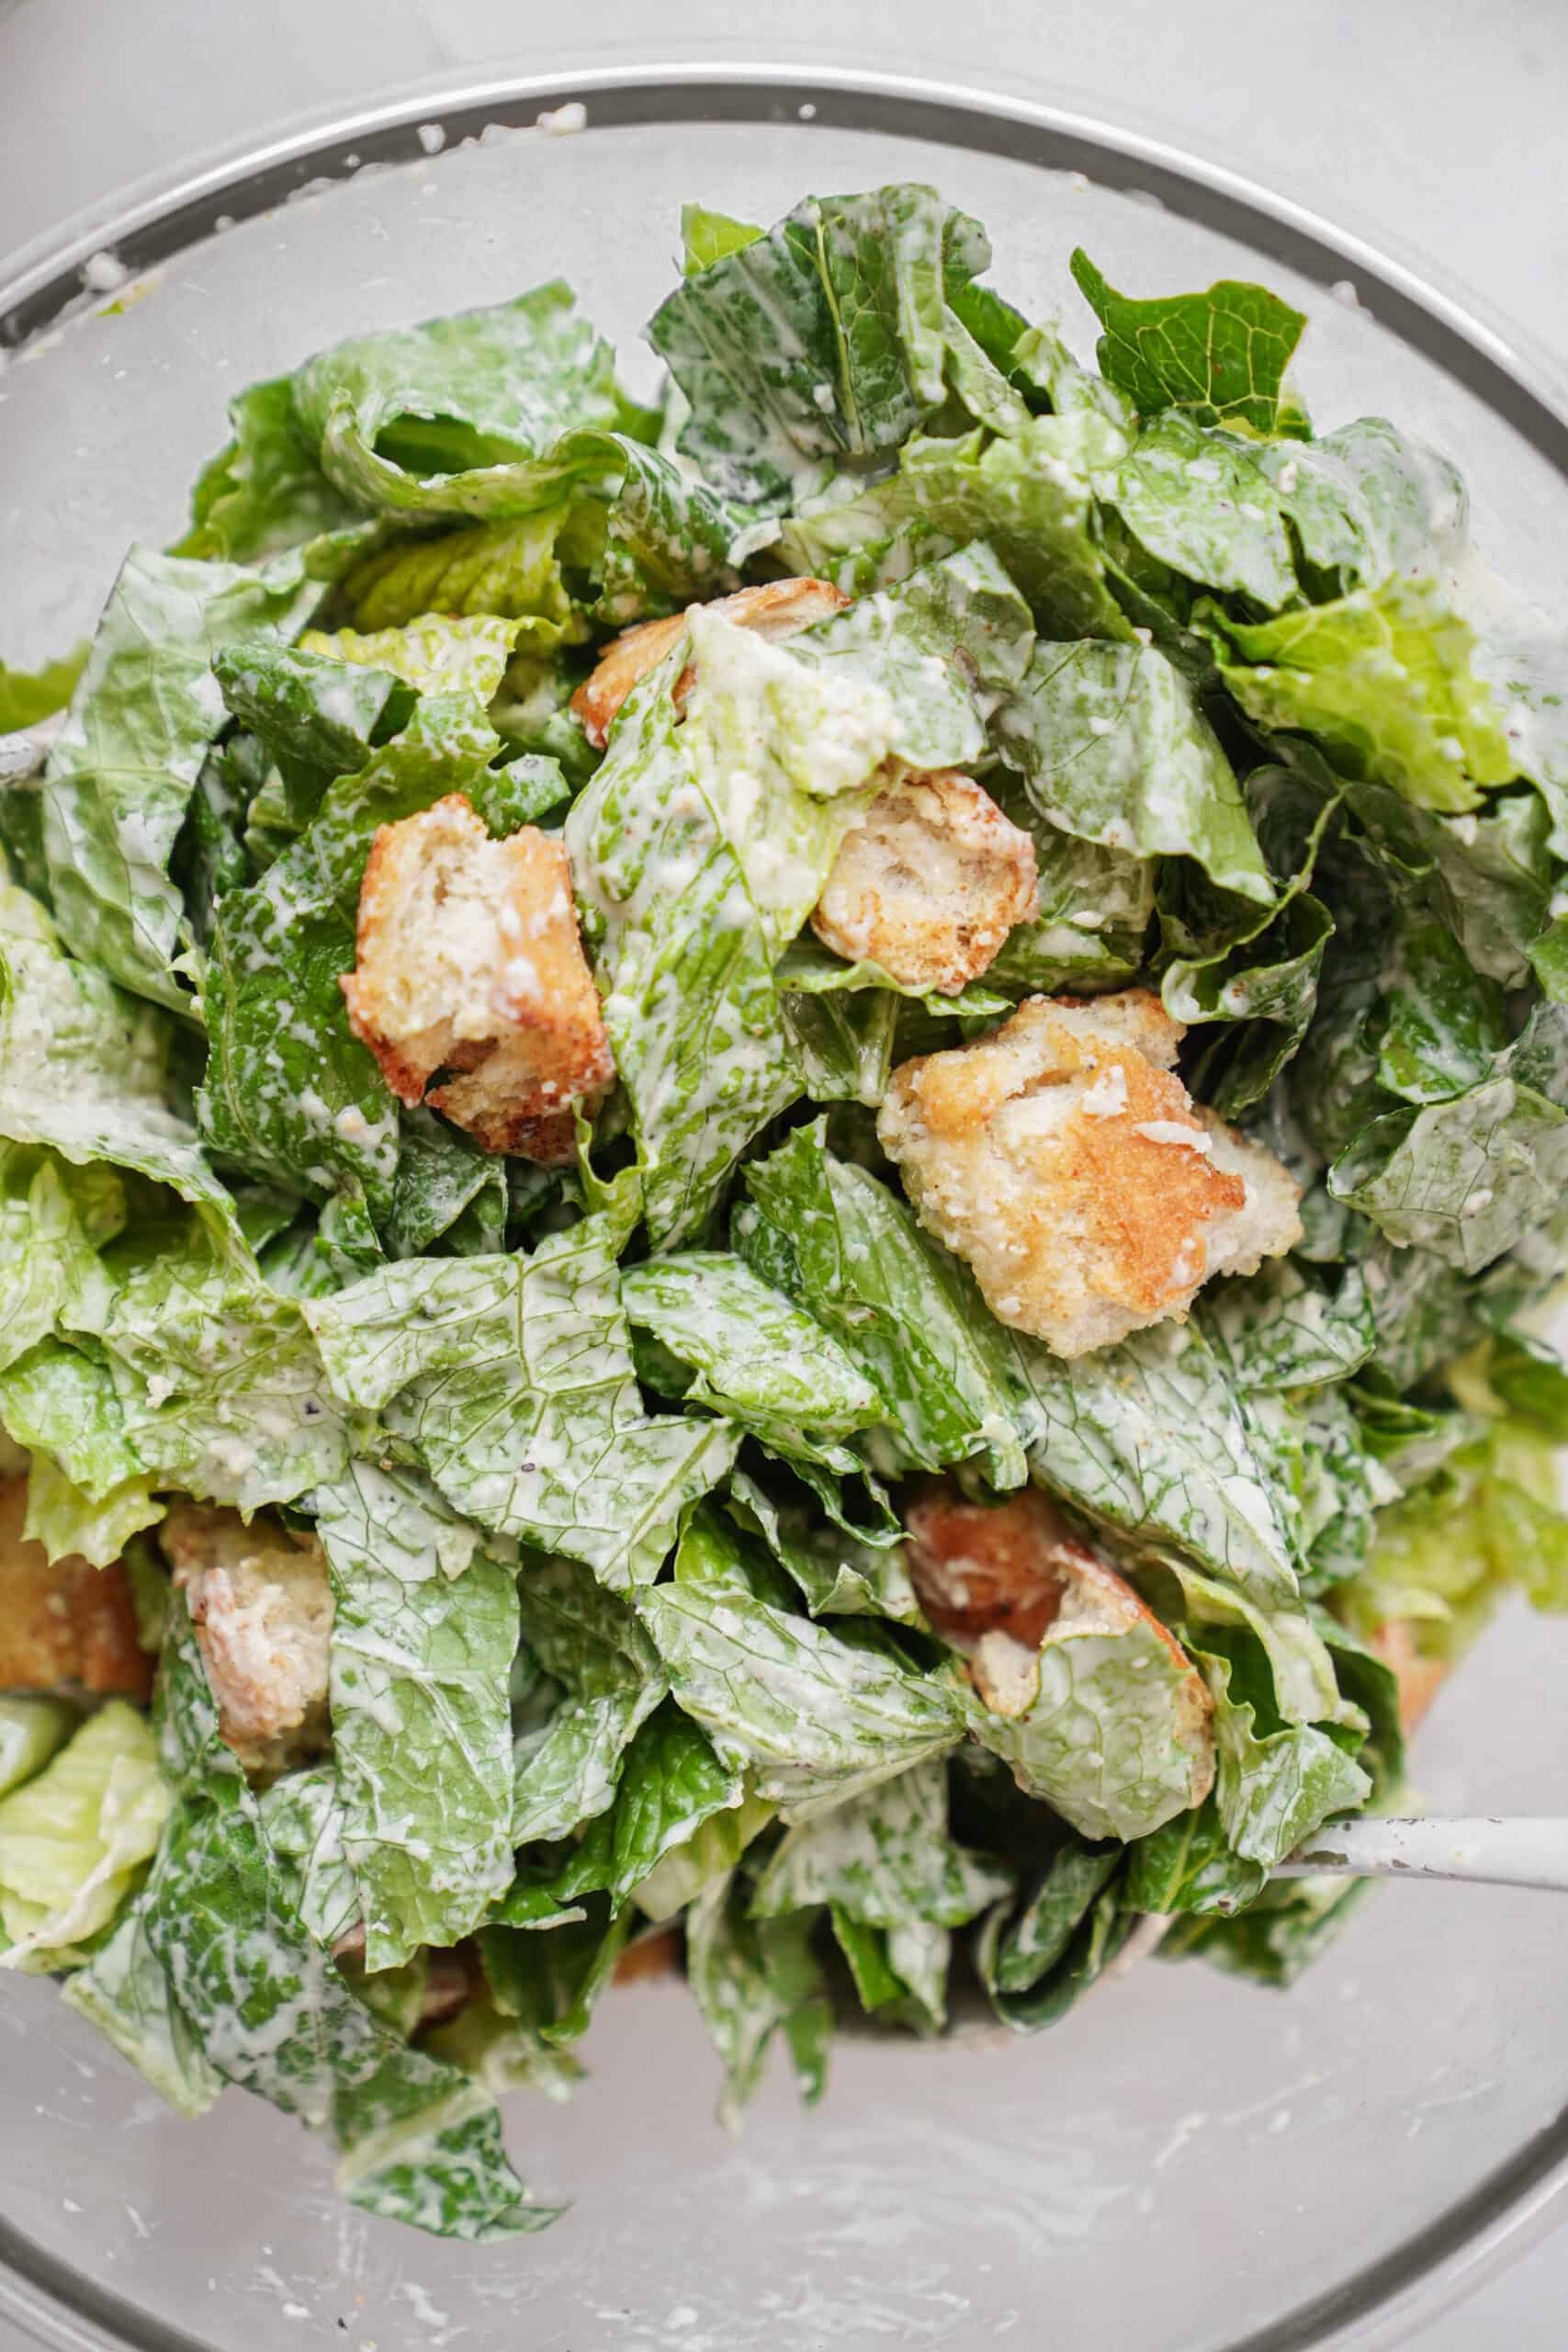 Caesar salad dressing recipe on top of a fresh lettuce with crutons